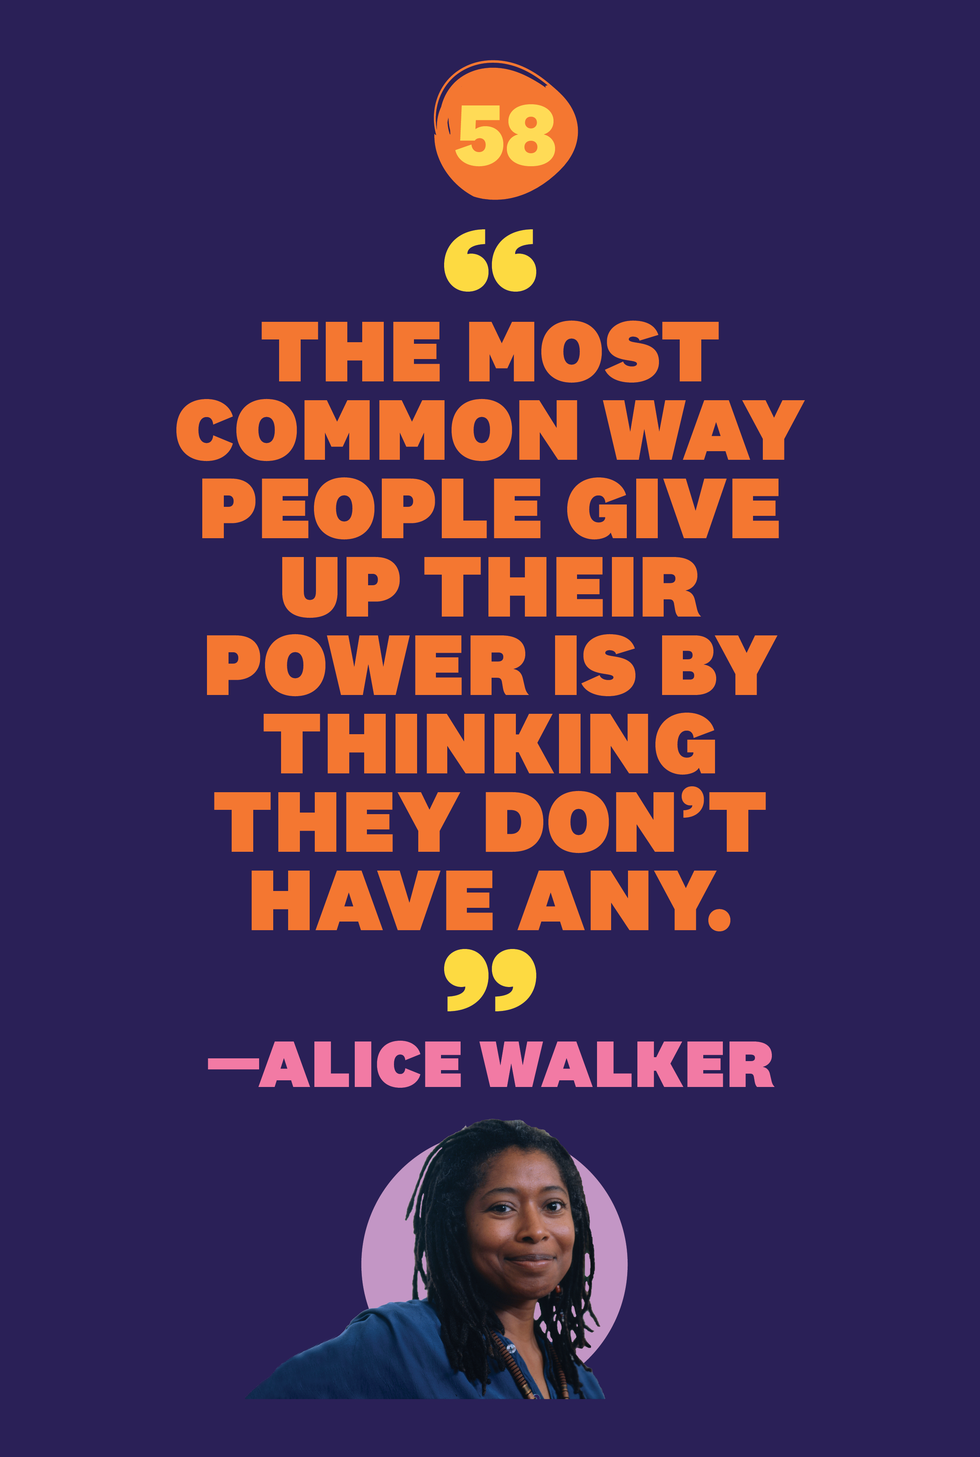 "the most common way people give up their power is by thinking they don’t have any" —alice walker